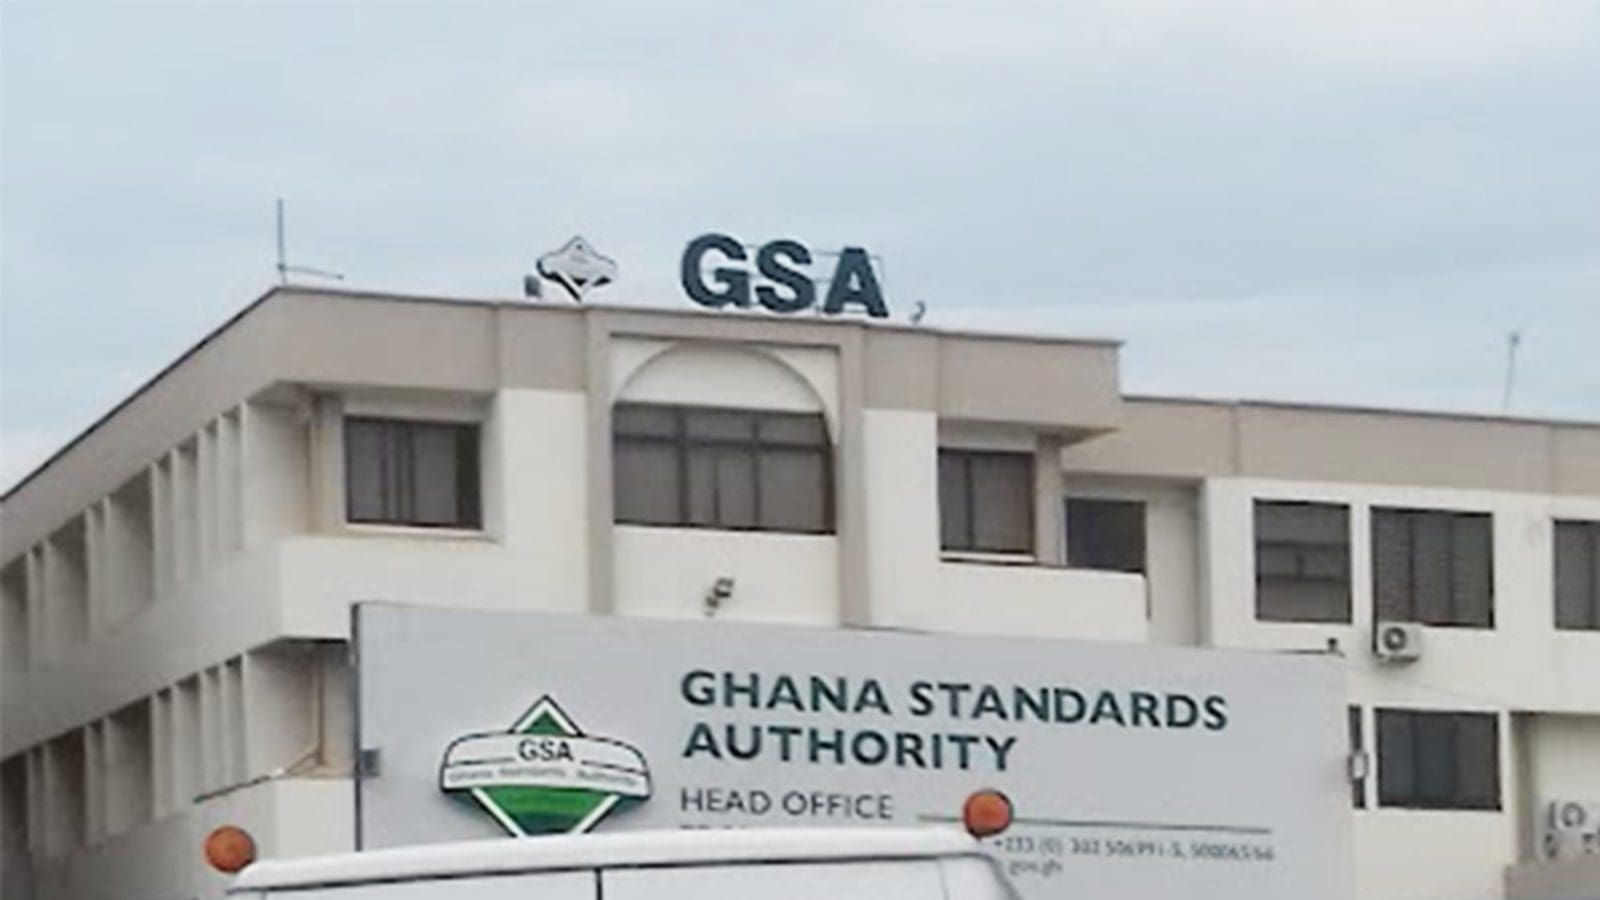 Trade associations rally behind Ghana Standards Authority’s efforts to combat substandard products